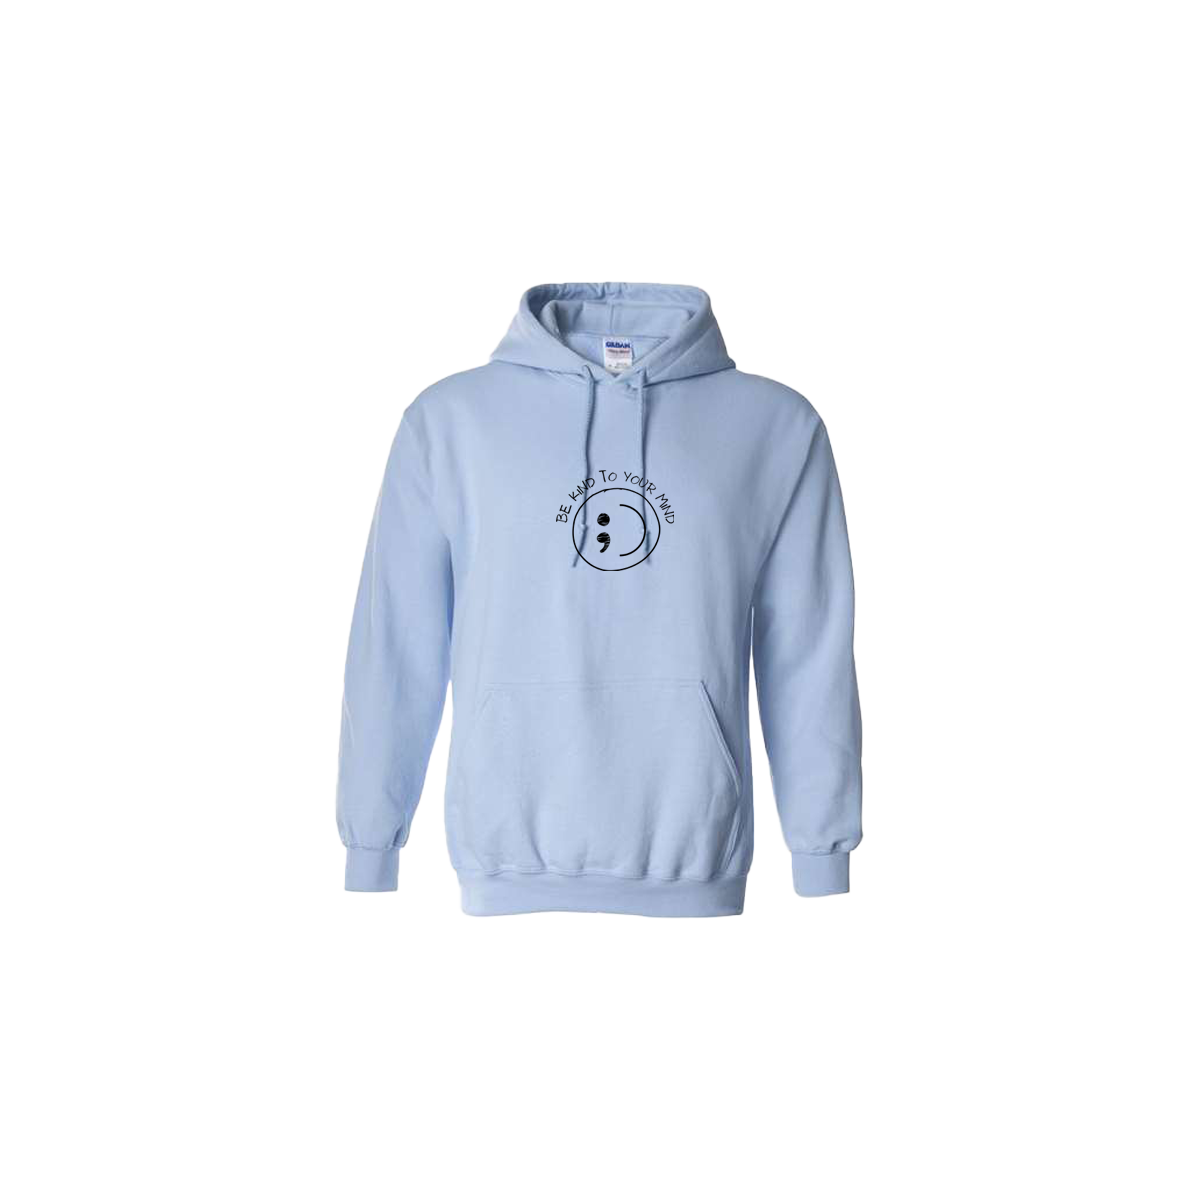 Be Kind To Your Mind Smiley Face Embroidered Light Blue Hoodie - Mental Health Awareness Clothing